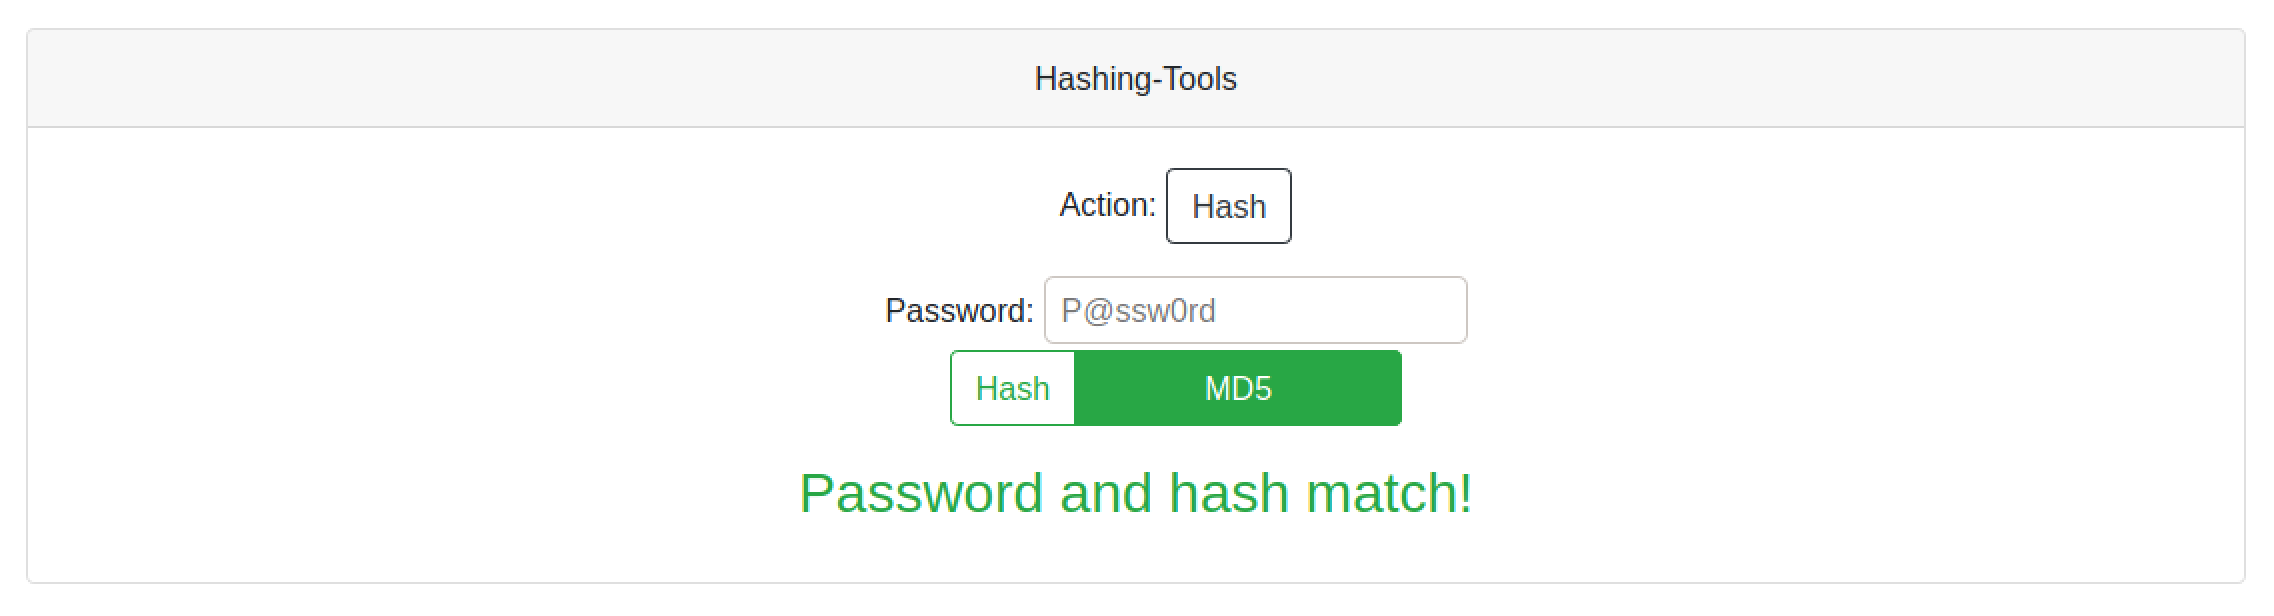 Password and hash matched.